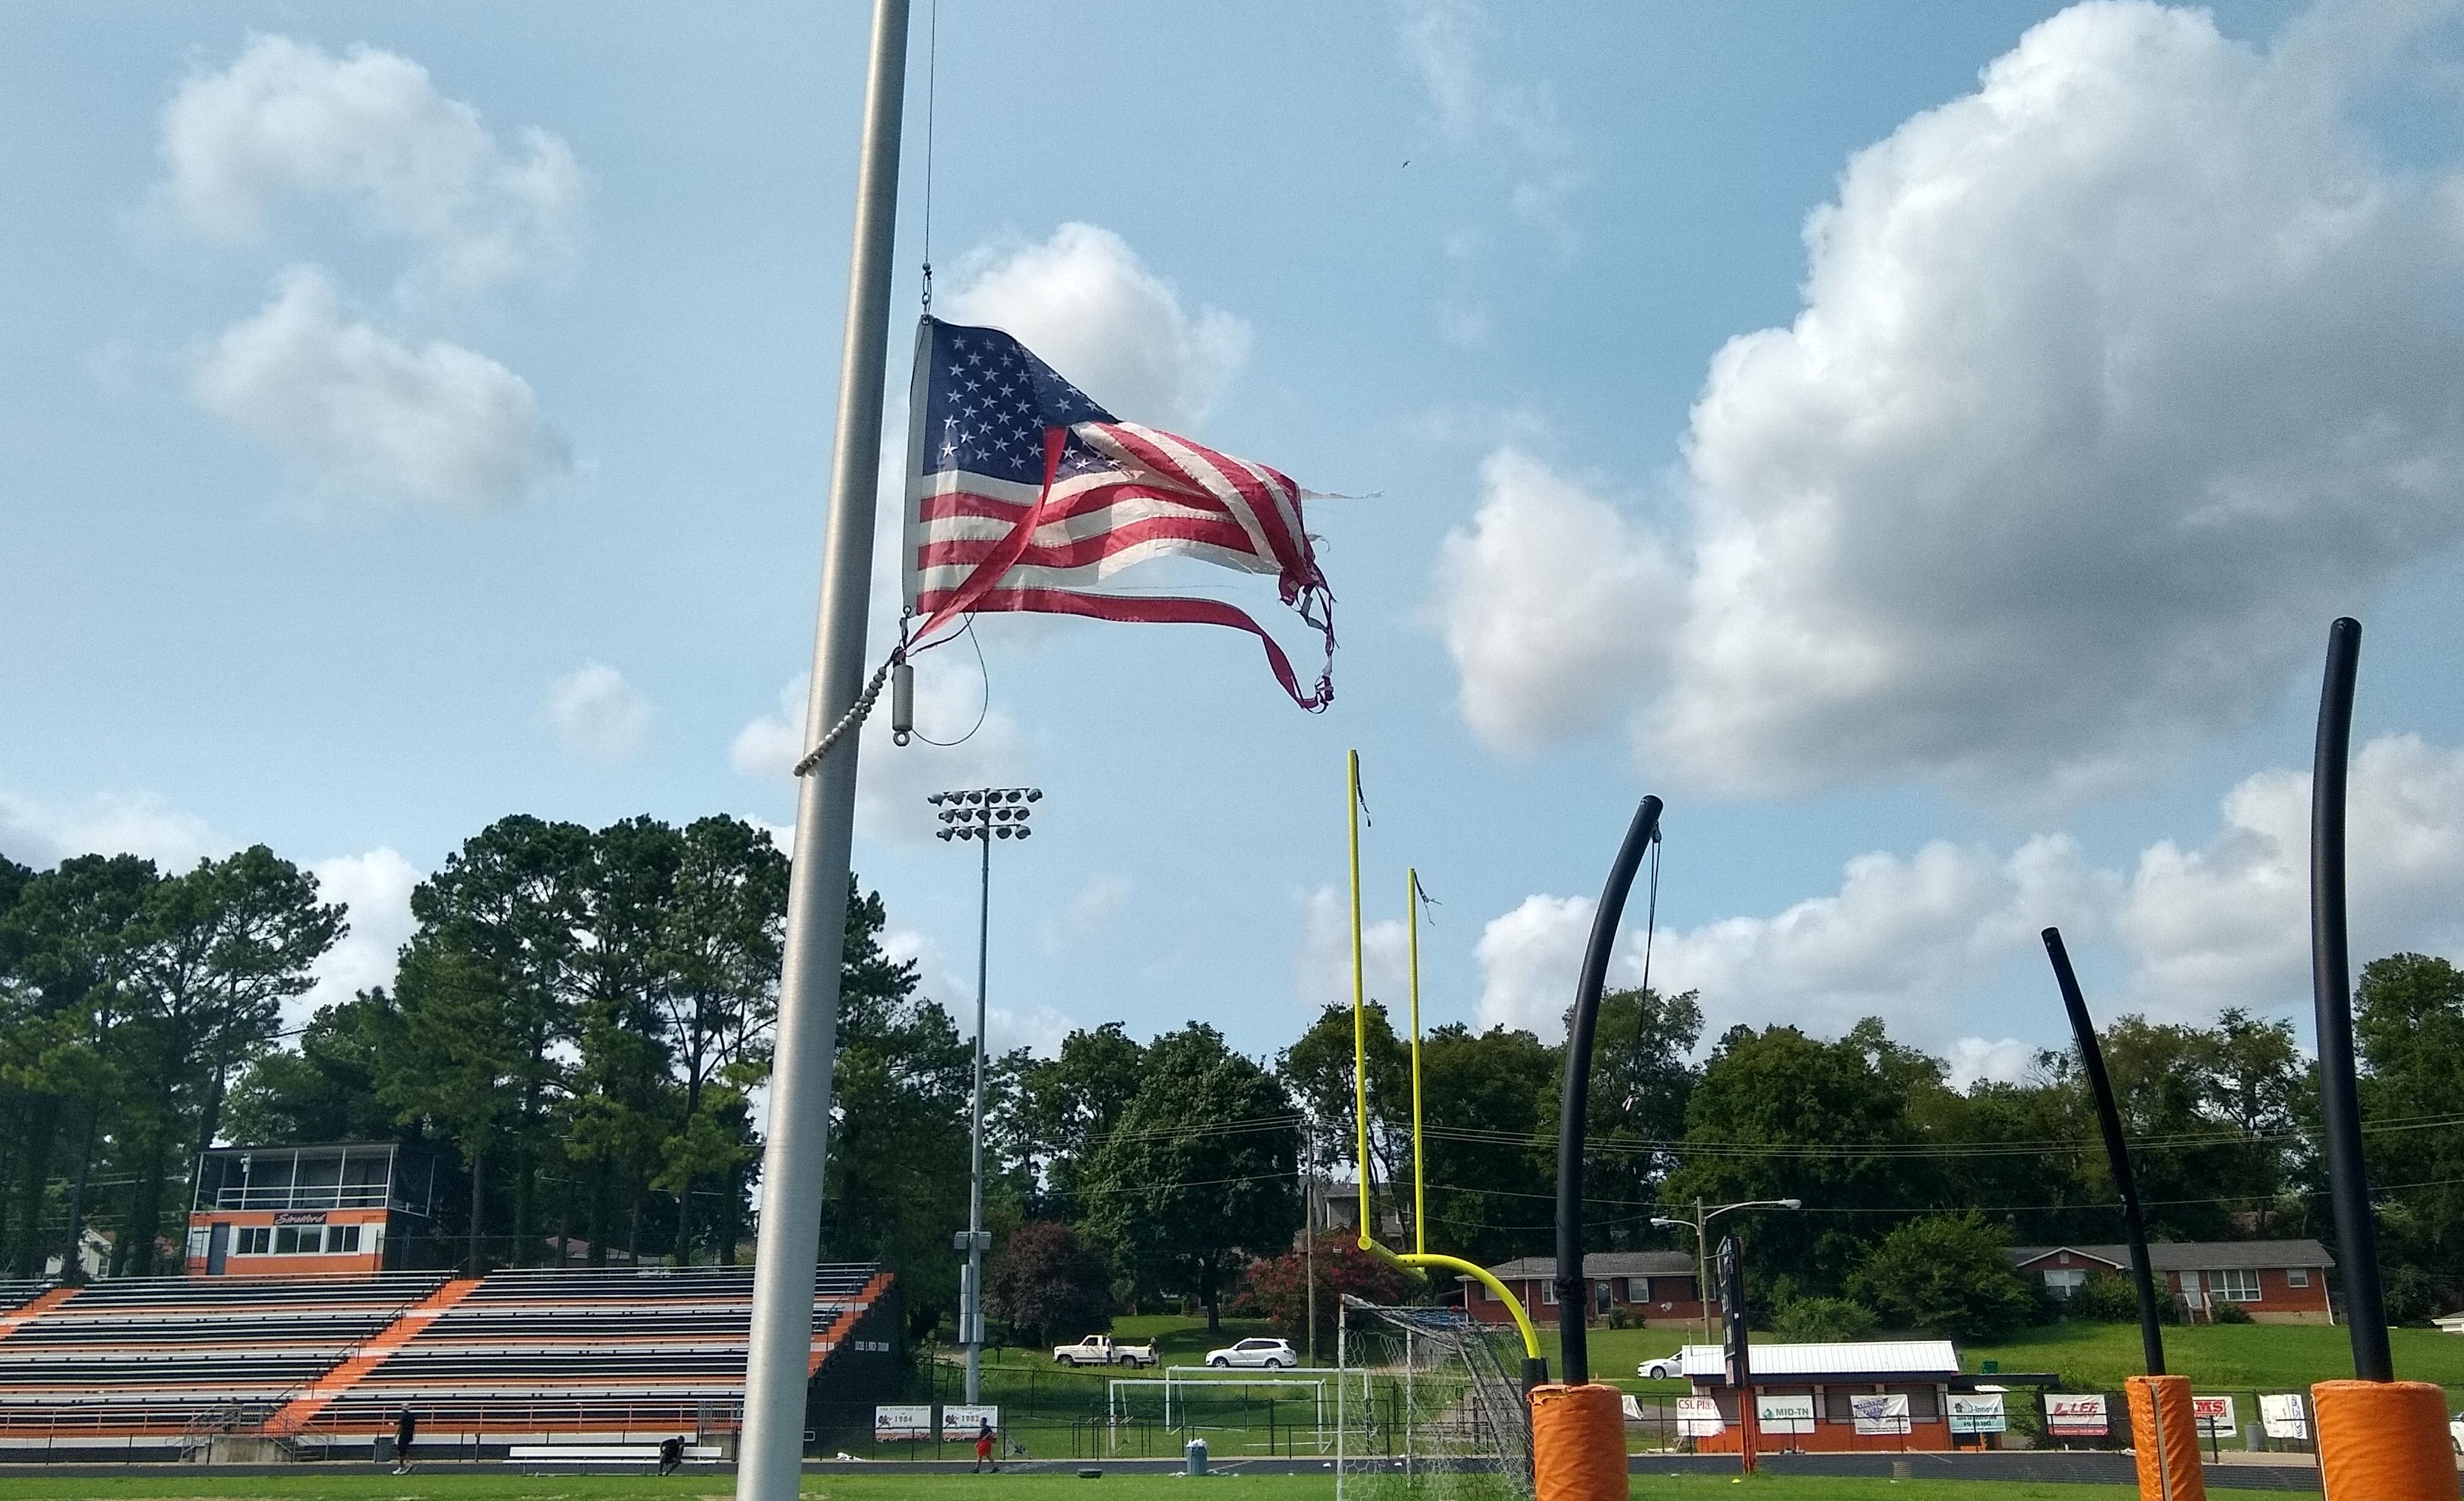 A slightly low-angle shot of a tattered American flag flying at half-staff in front of a high school football field.